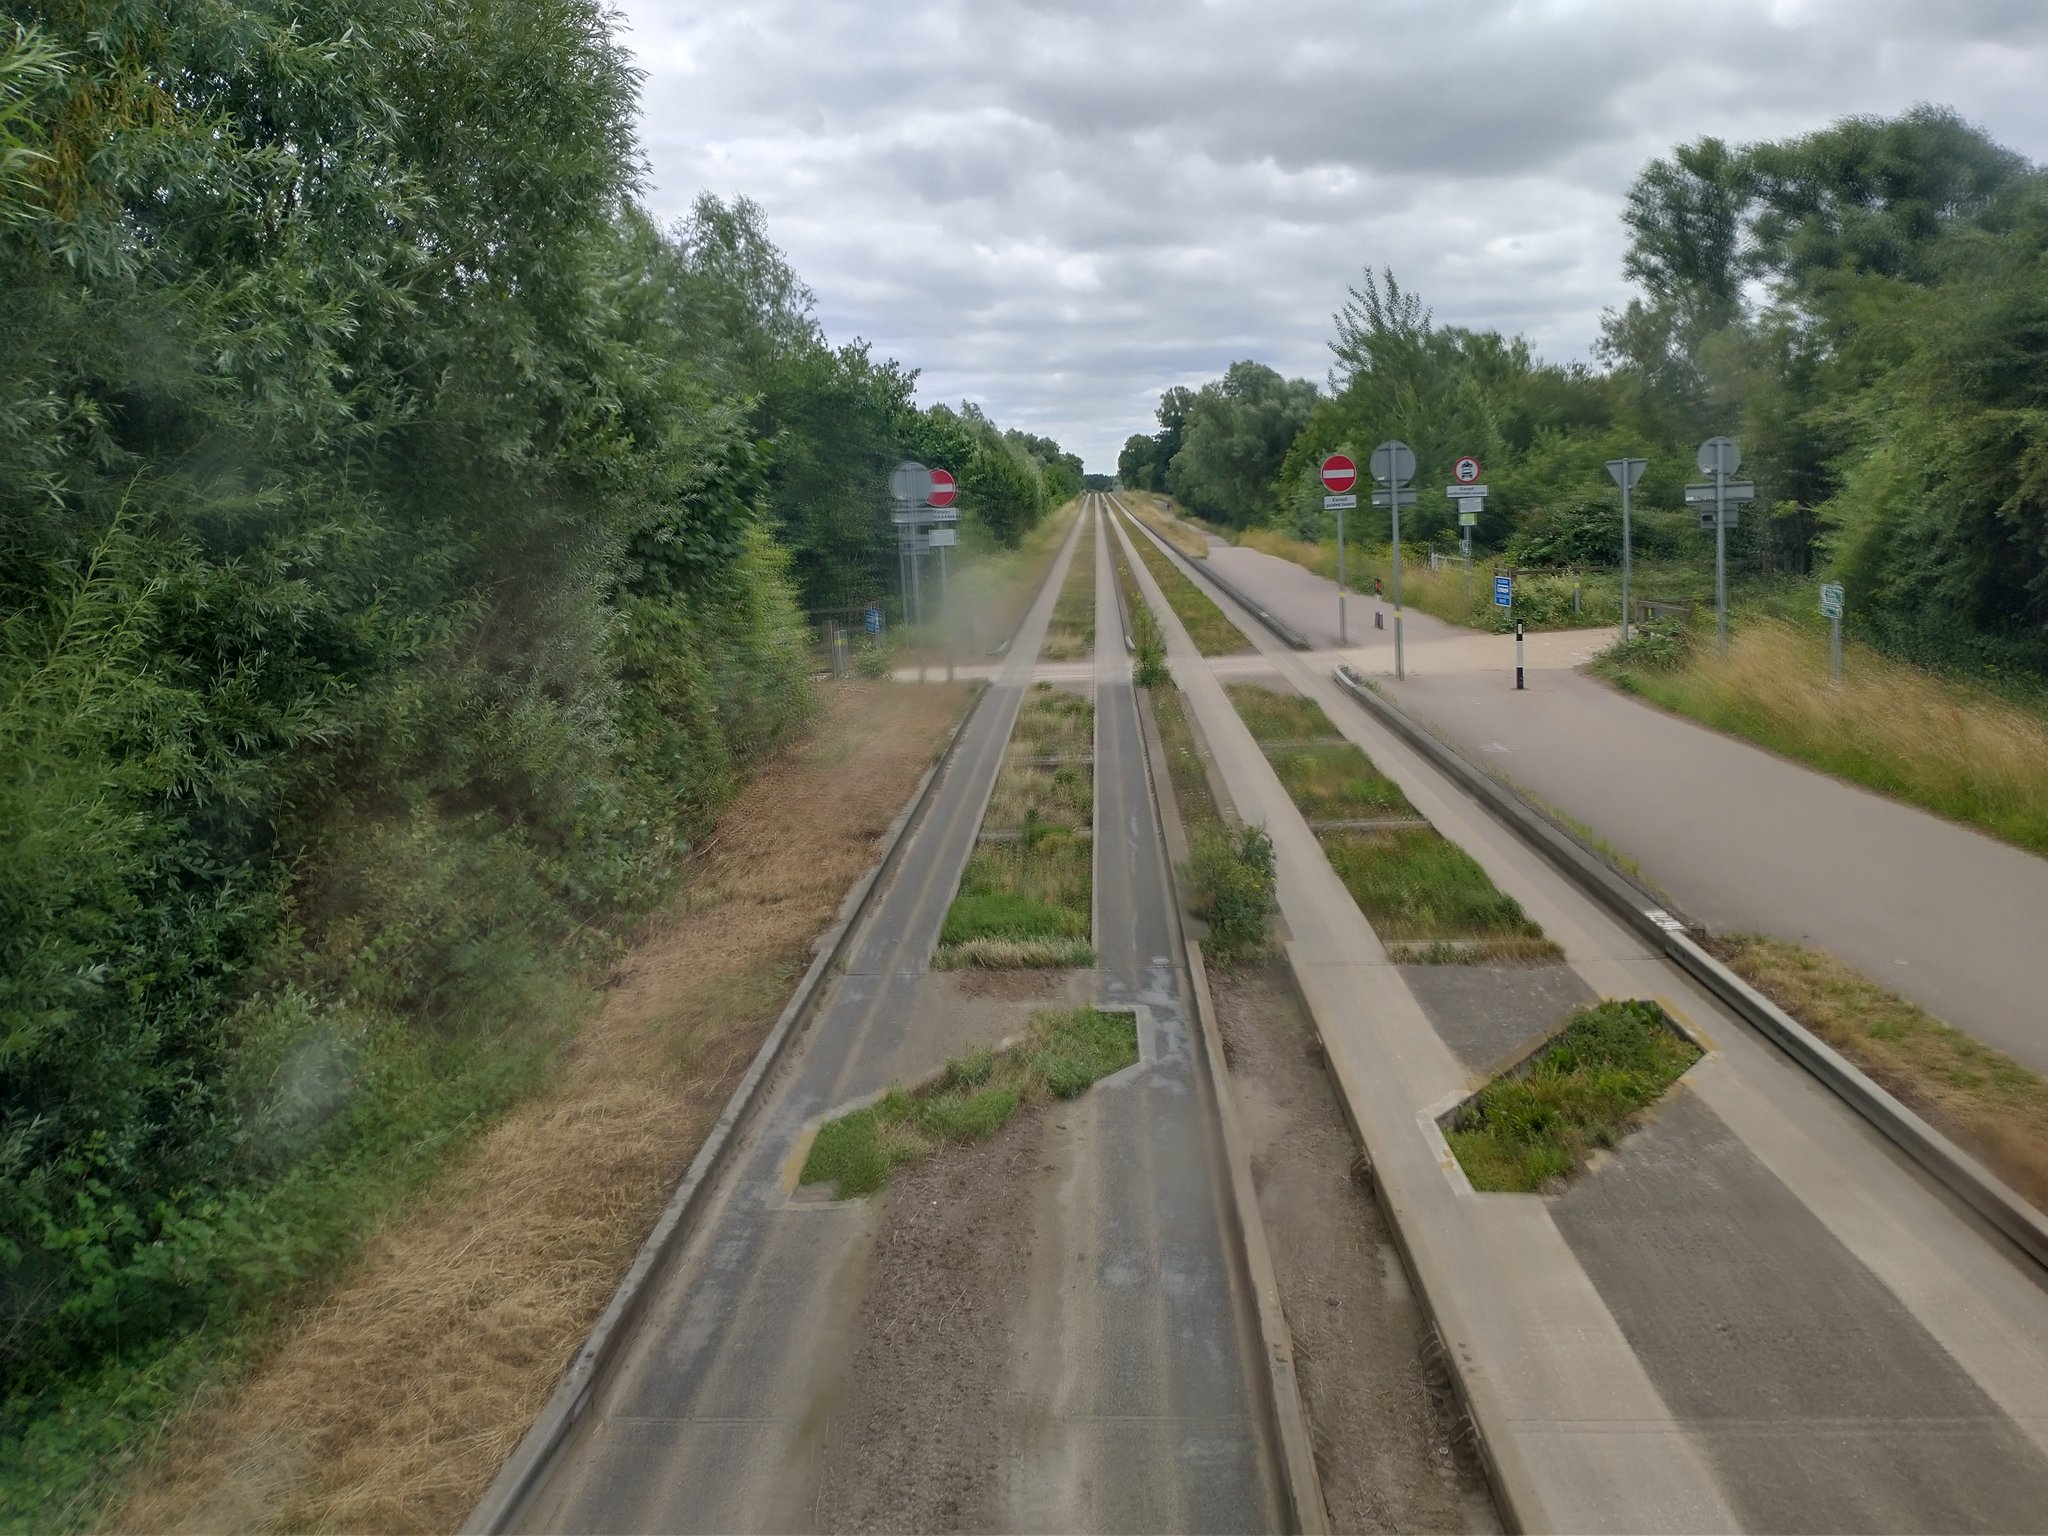 Cambridge Guided Busway